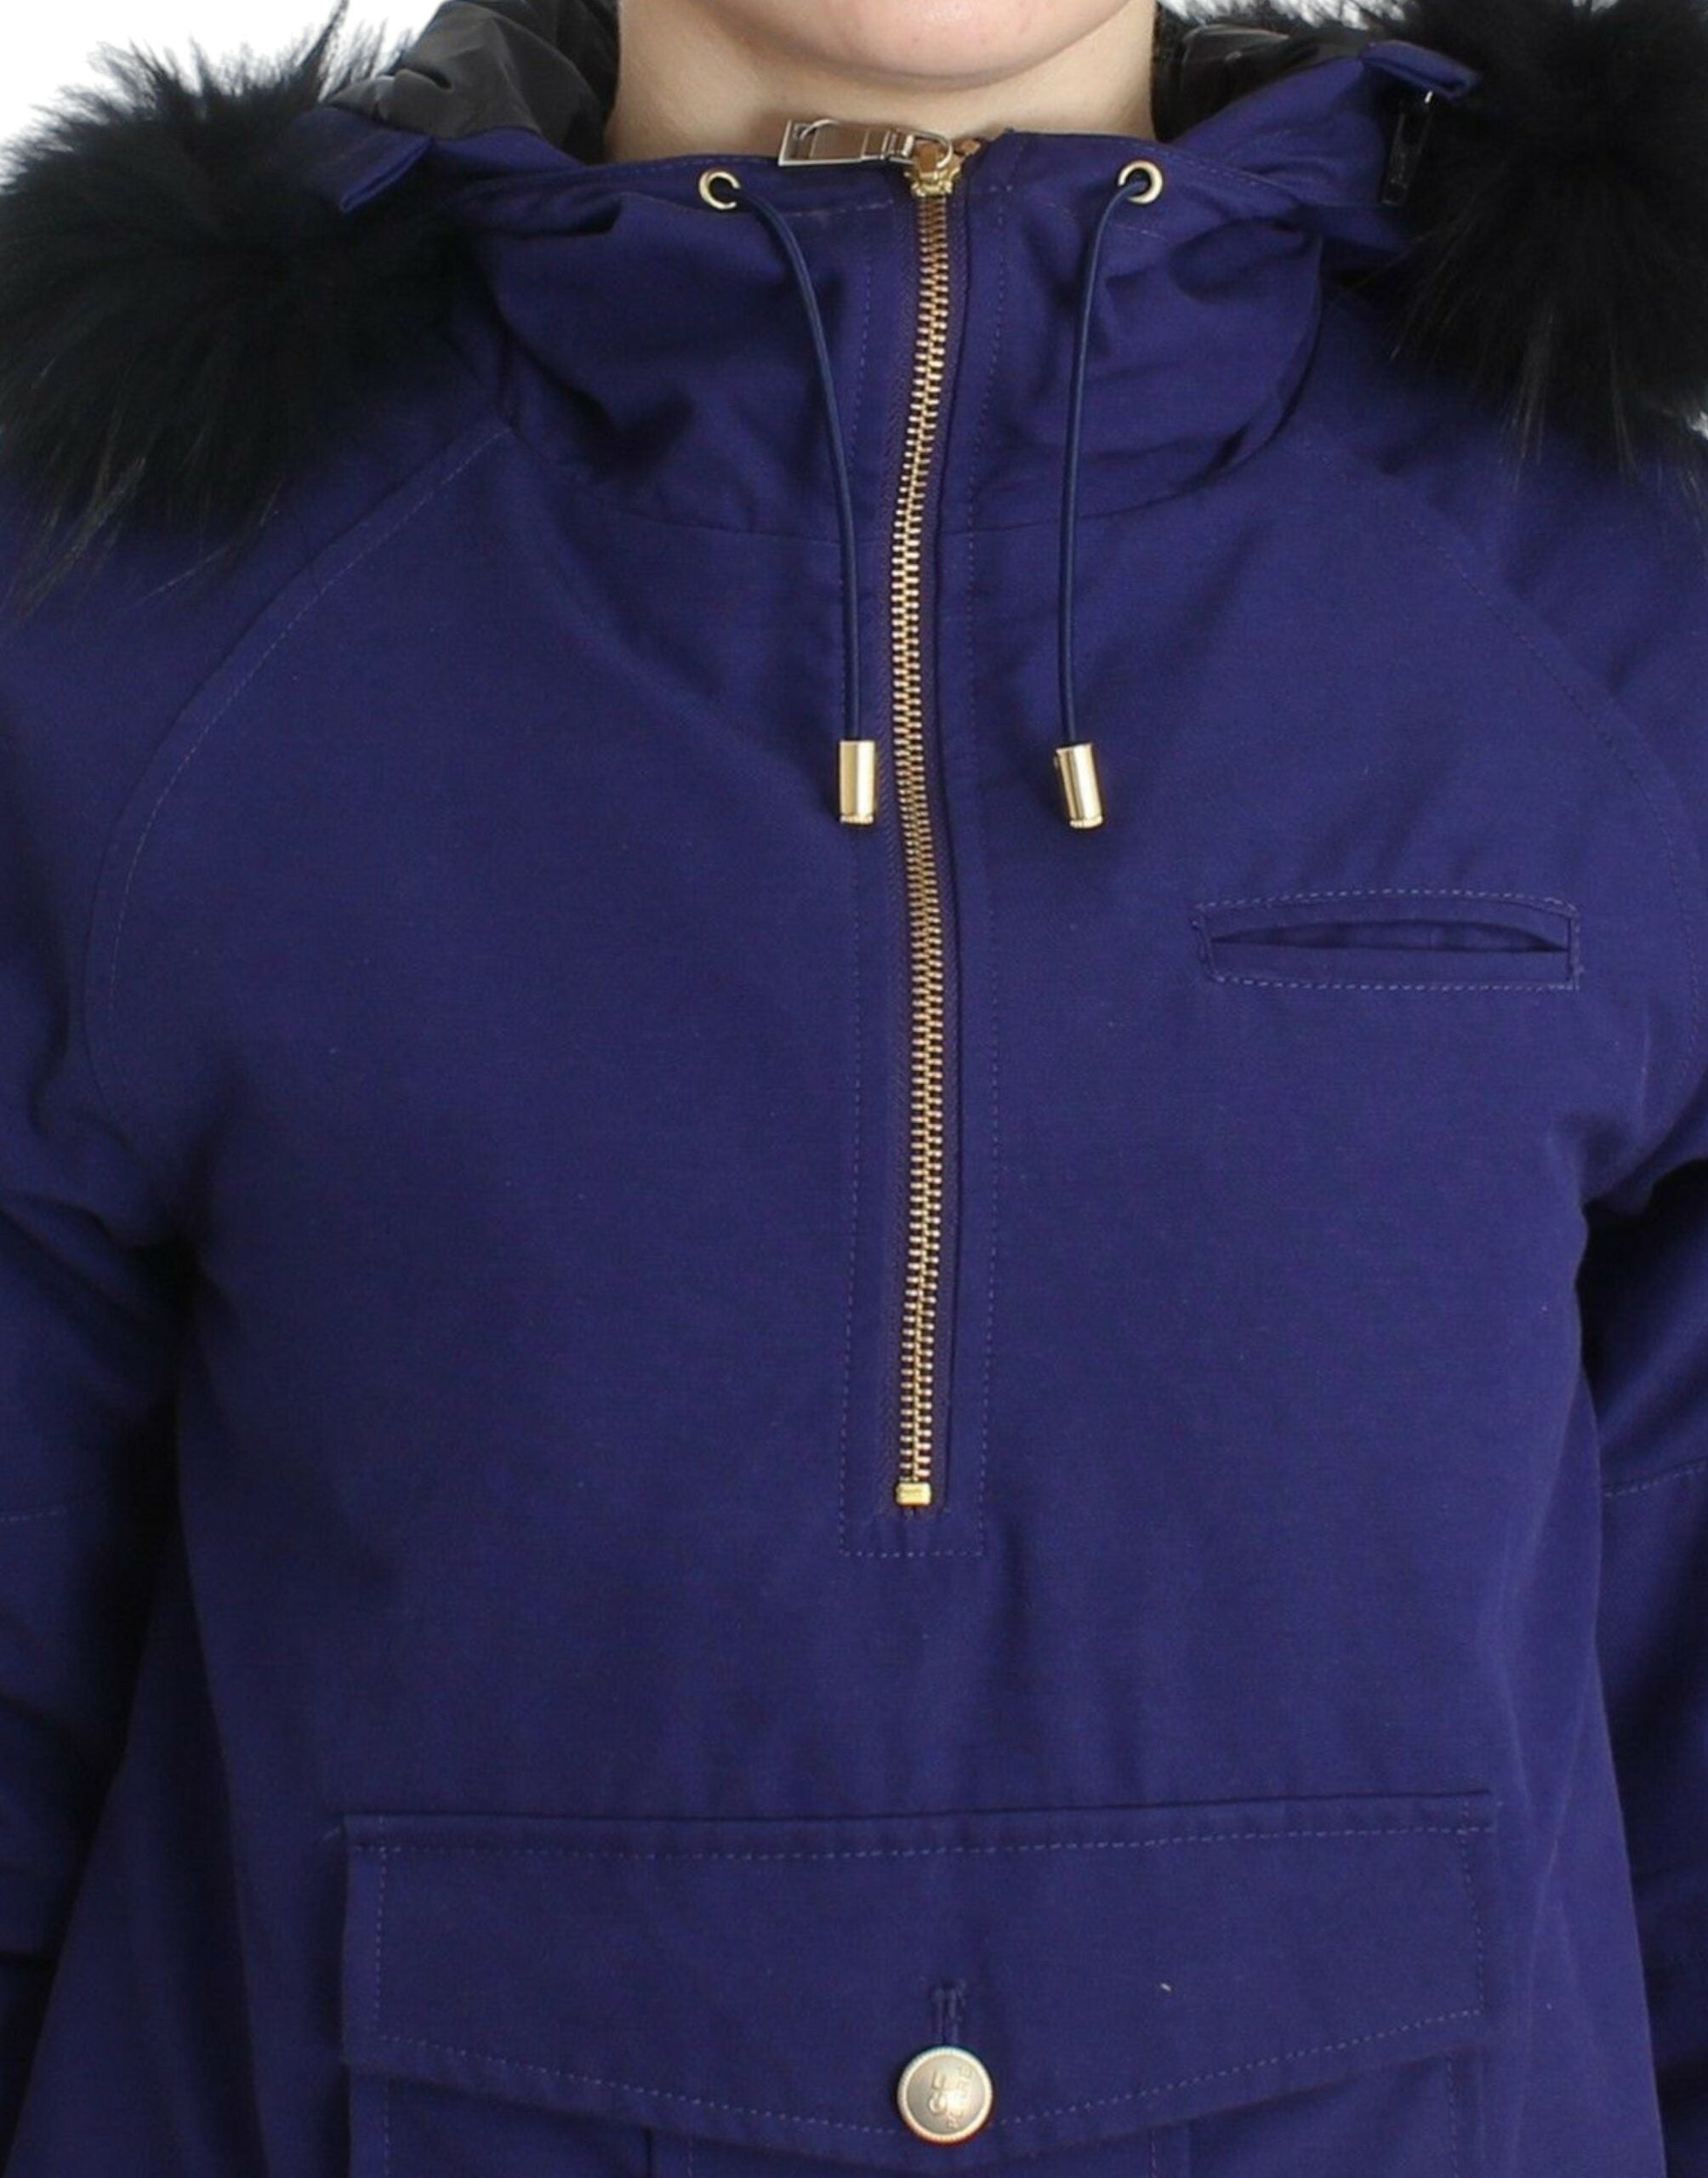 GF Ferre Chic Blue K-Way Jacket with Faux Fur Accent